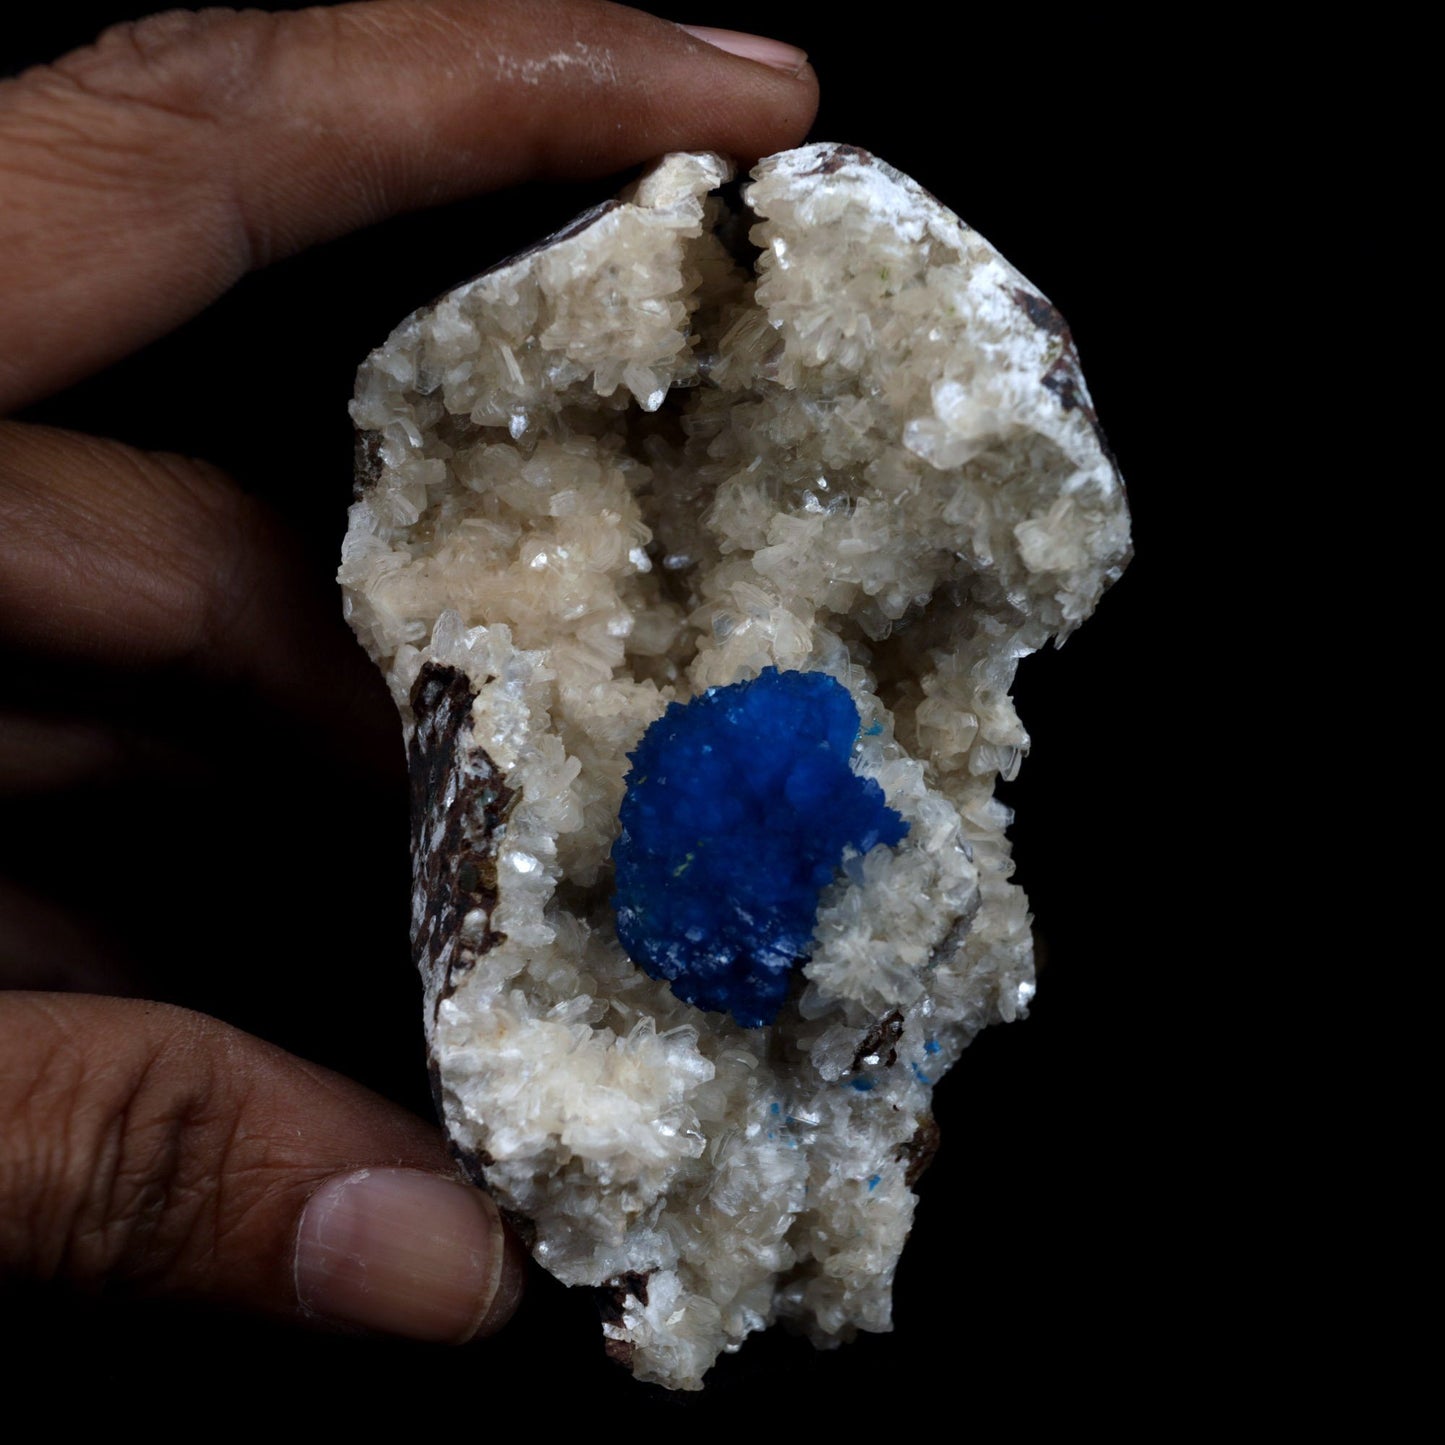 Cavansite Ball on Heuandite (Rare Find) Natural Mineral Specimen # B …  https://www.superbminerals.us/products/cavansite-ball-on-heuandite-rare-find-natural-mineral-specimen-b-4872  Features: This magnificent piece is composed of a radial group of superb deep blue Cavansite crystals on basalt, You can see several various forms of crystallisation in this piece, all of which have the same, strong, saturated blue colour that is honestly 